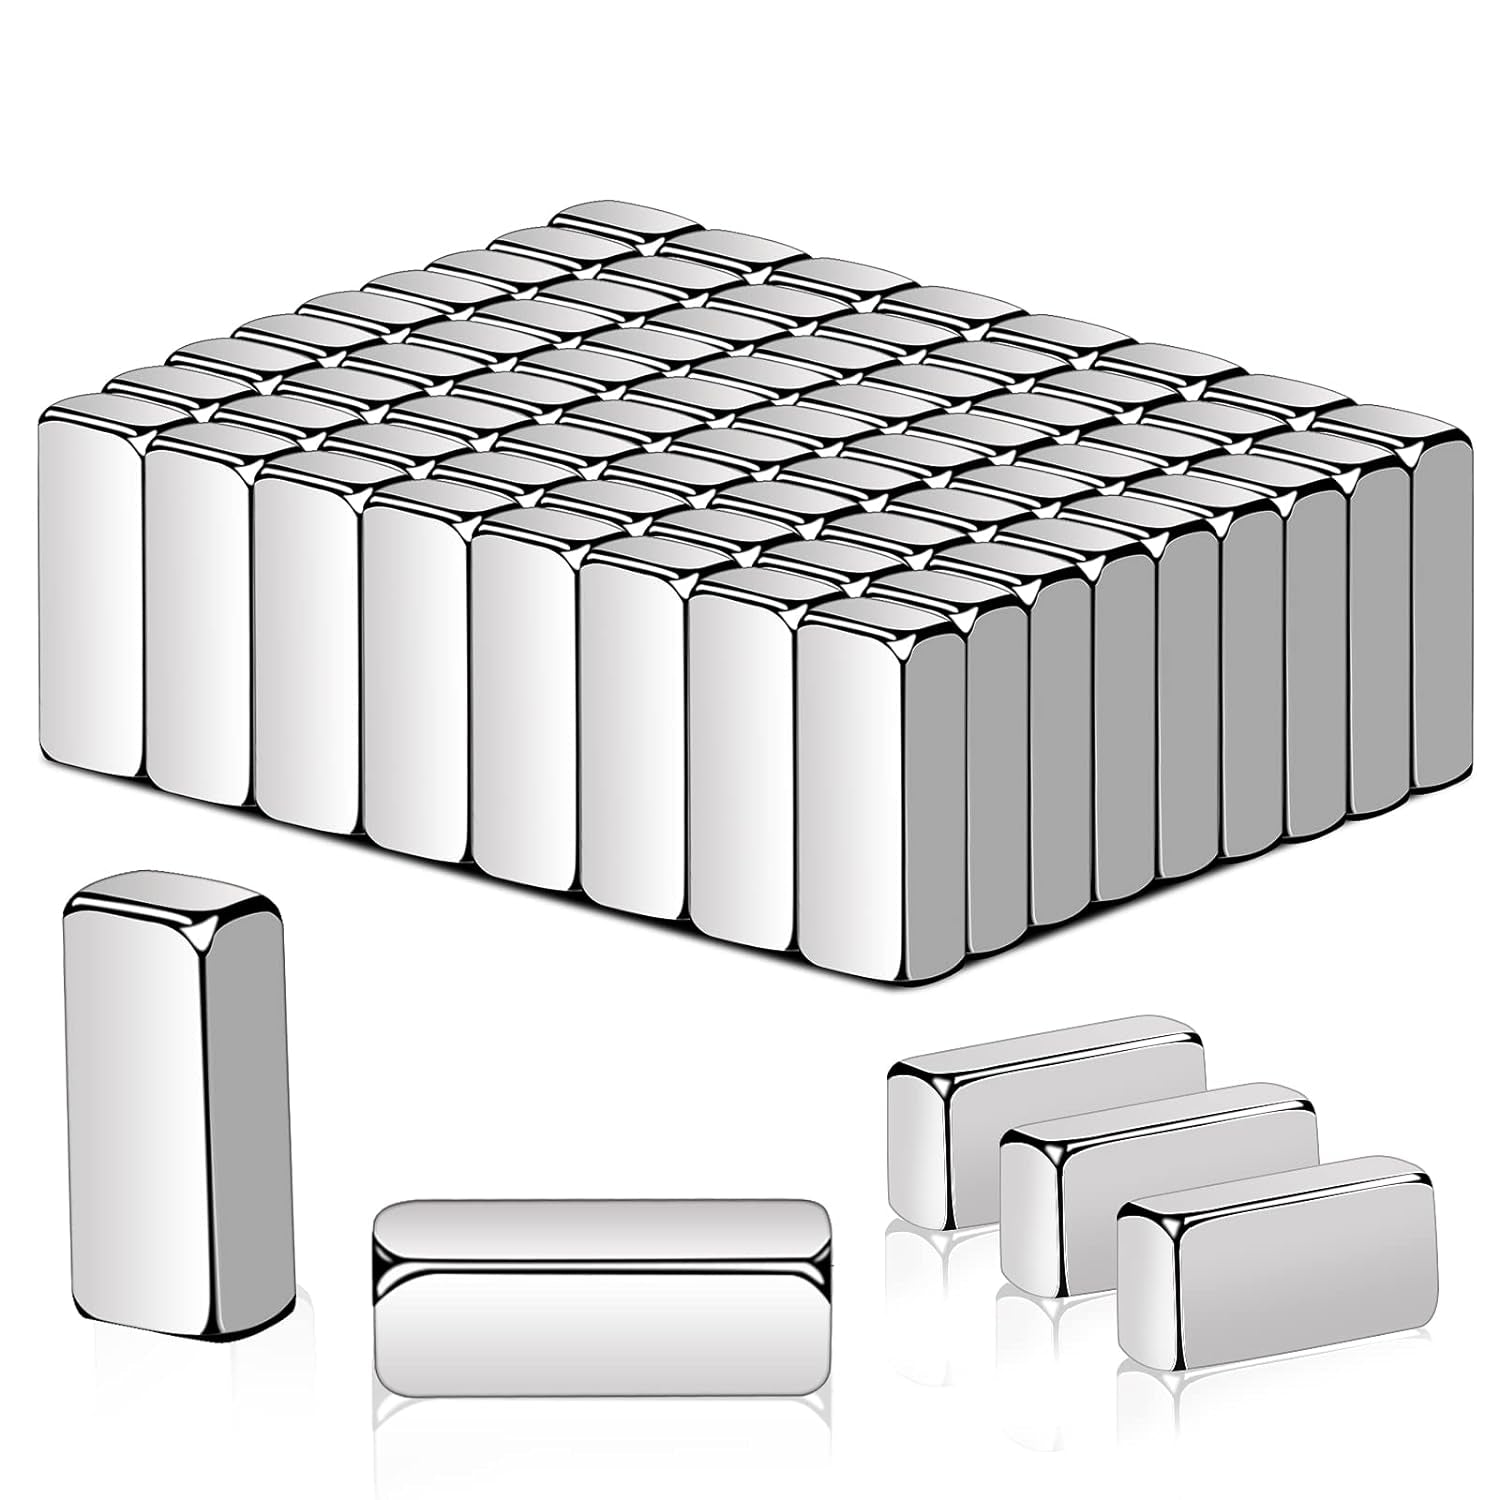 MIKEDE 30Pcs Strong Neodymium Magnets Bar, Heavy Duty Magnets, Rectangular Magnetic Bar, Small Powerful Rare Earth Magnets for Crafts, Refrigerator, Classroom, Kitchen, Office – 30X10X3Mm